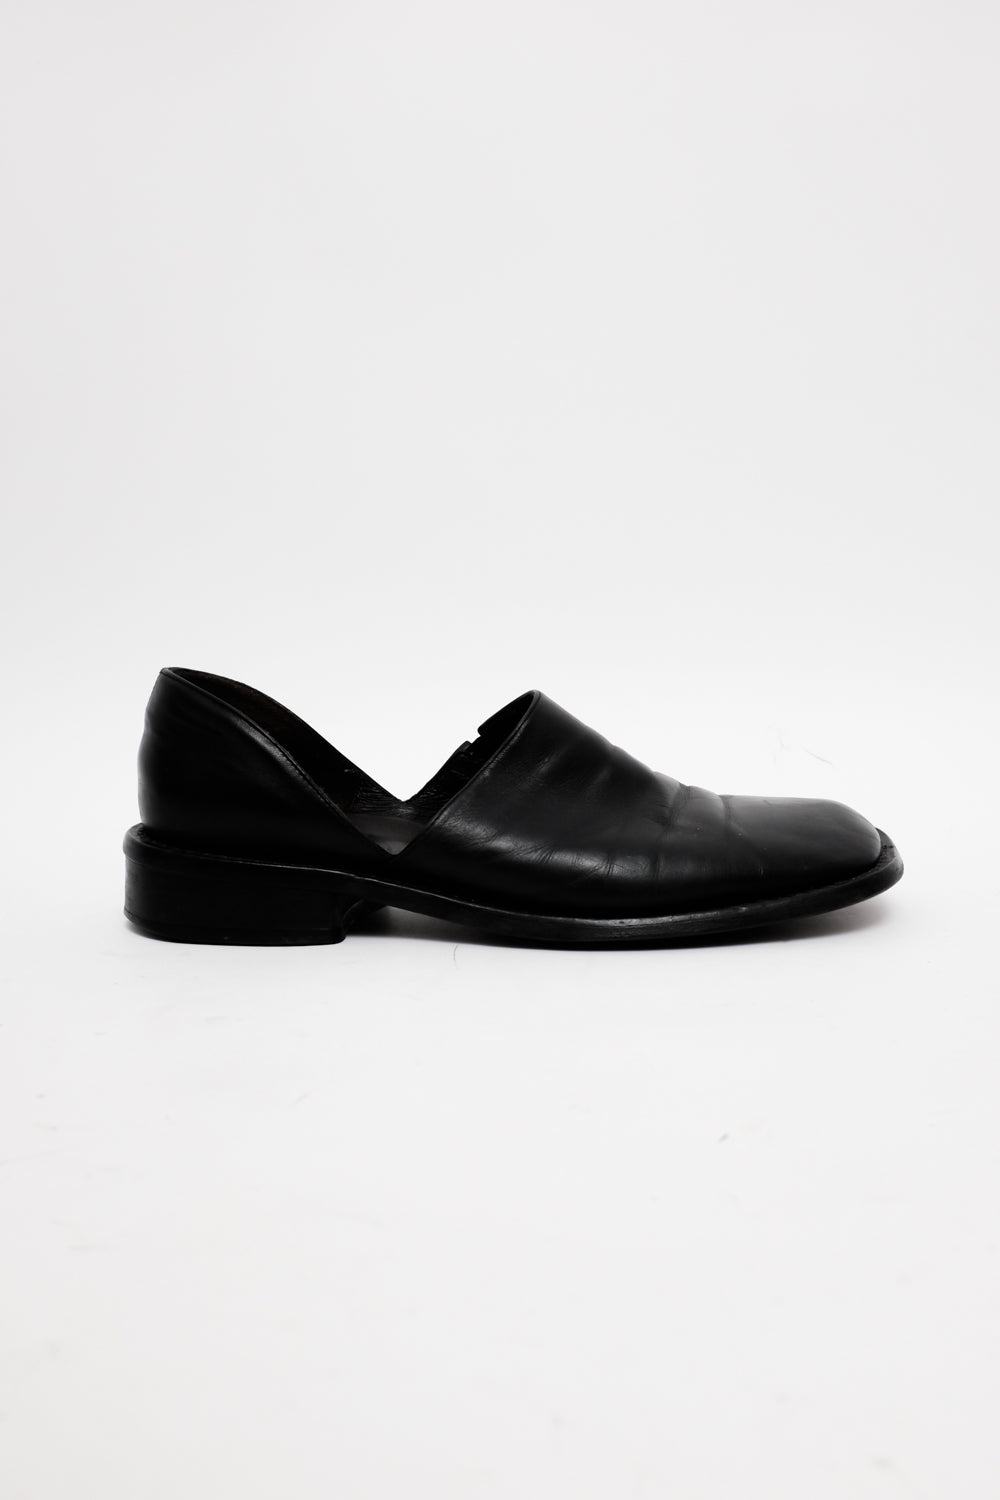 SQUARE TOE 38 BLACK ITALY LEATHER SHOES